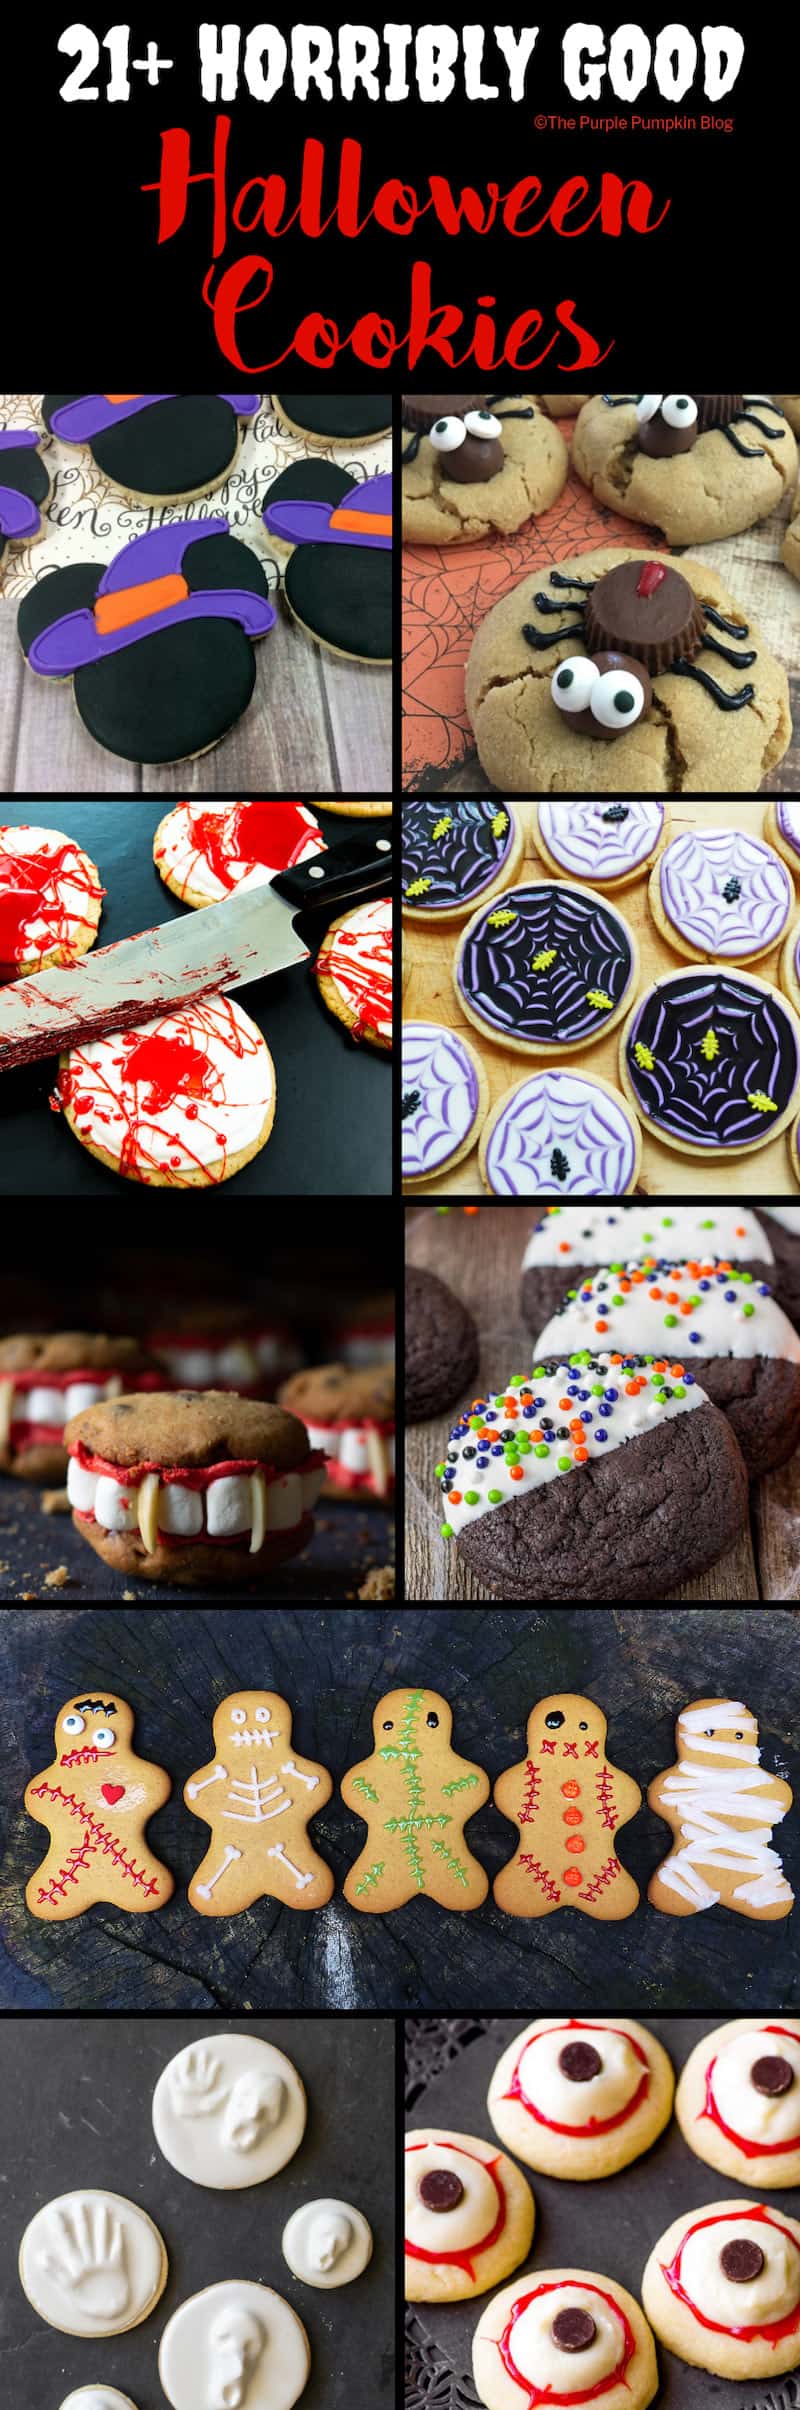 These 21+ Horribly Good Halloween cookies include Halloween cookie recipes that you bake from scratch, as well as cheat's cookies where you decorate store bought ones.